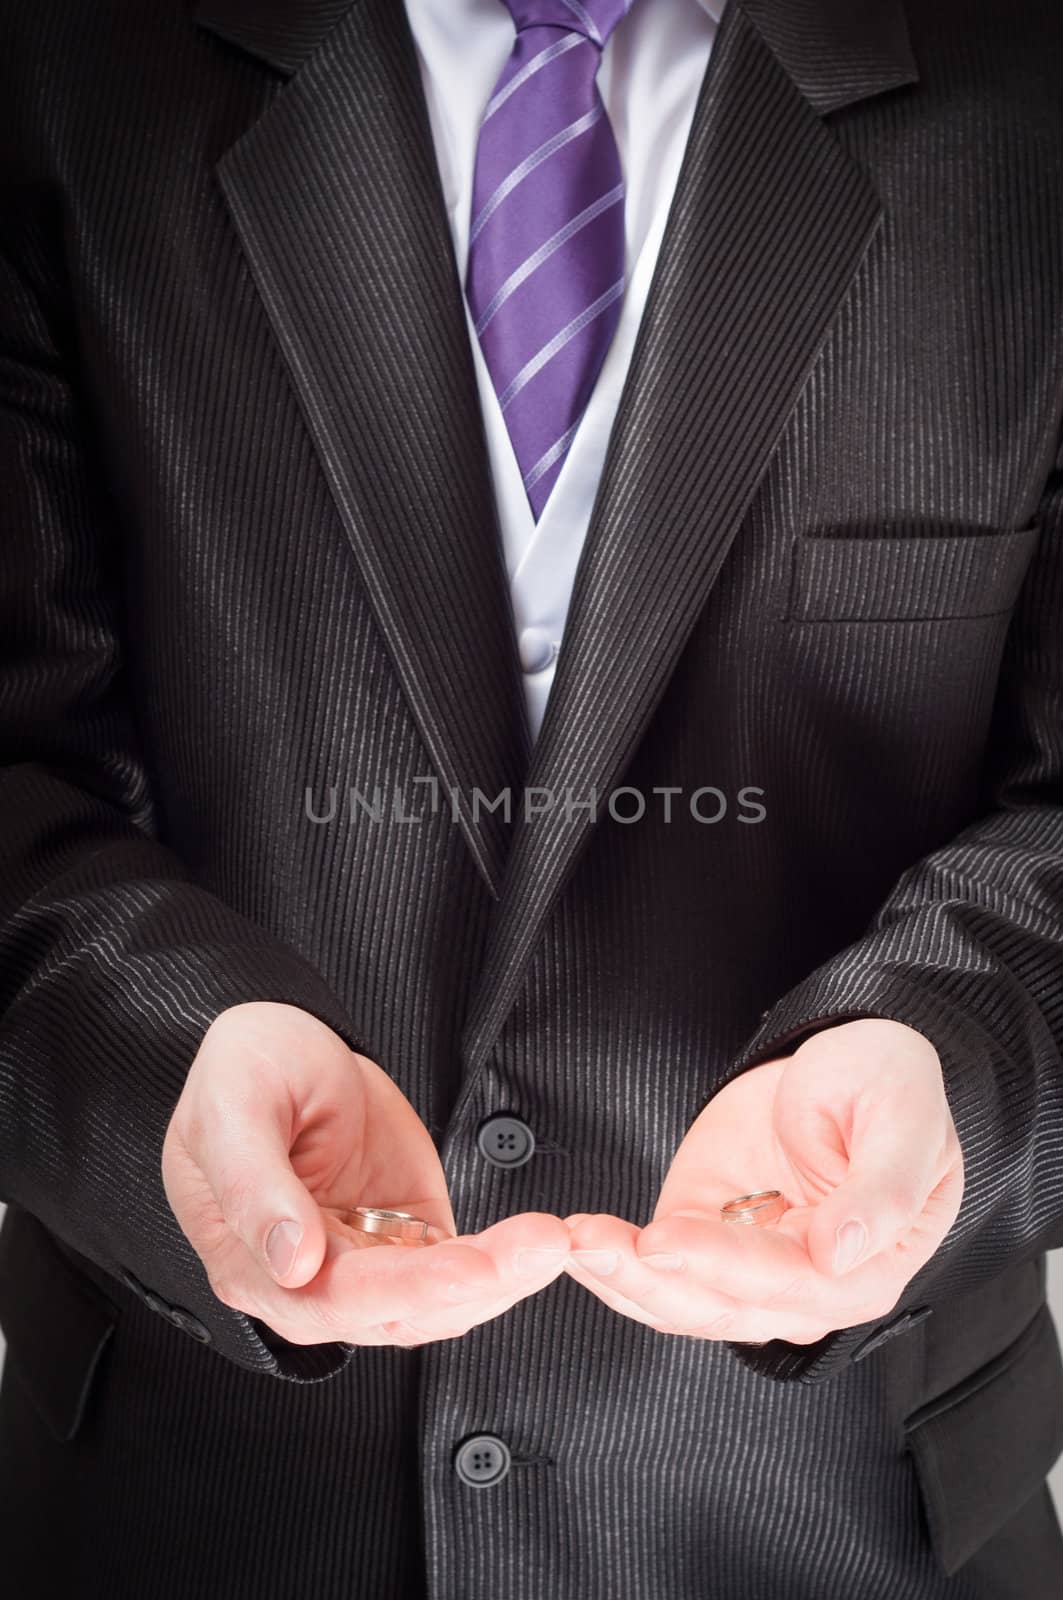 Groom holding the ring of marriage in his hands